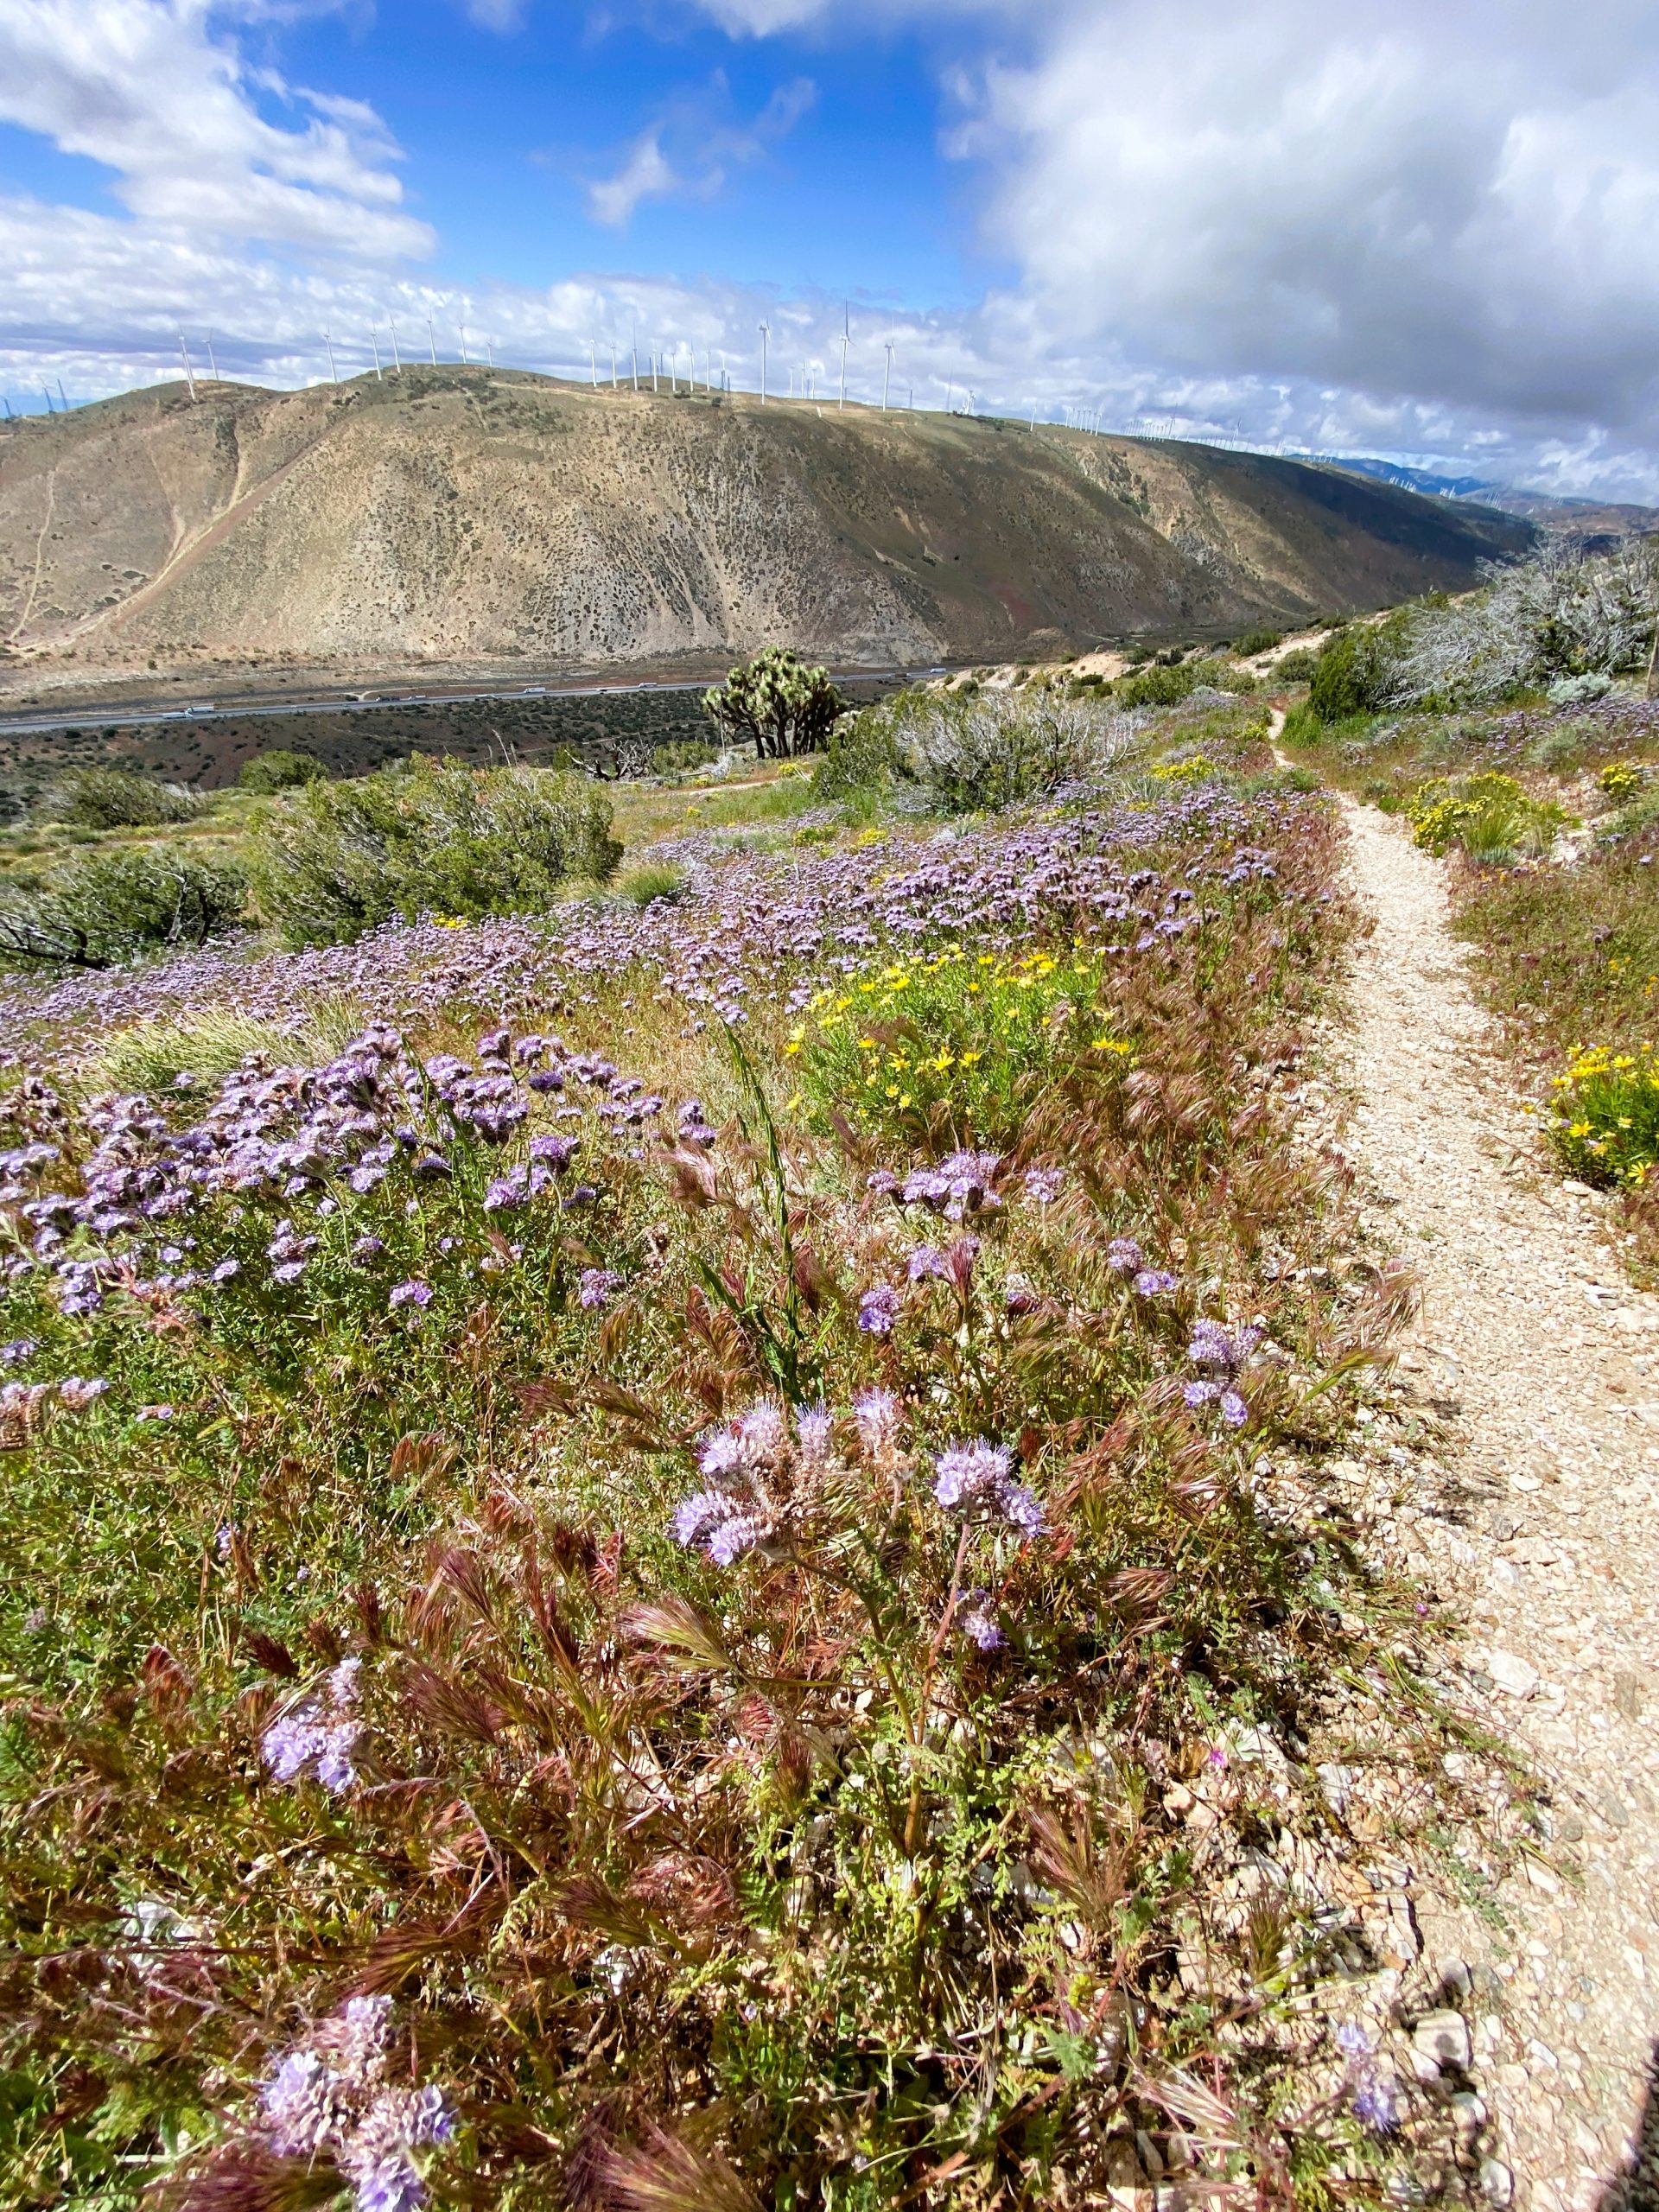  PCT Trail Journal: Day 23 Mile 597.3 to 578.1 joshua trees and wildflowers